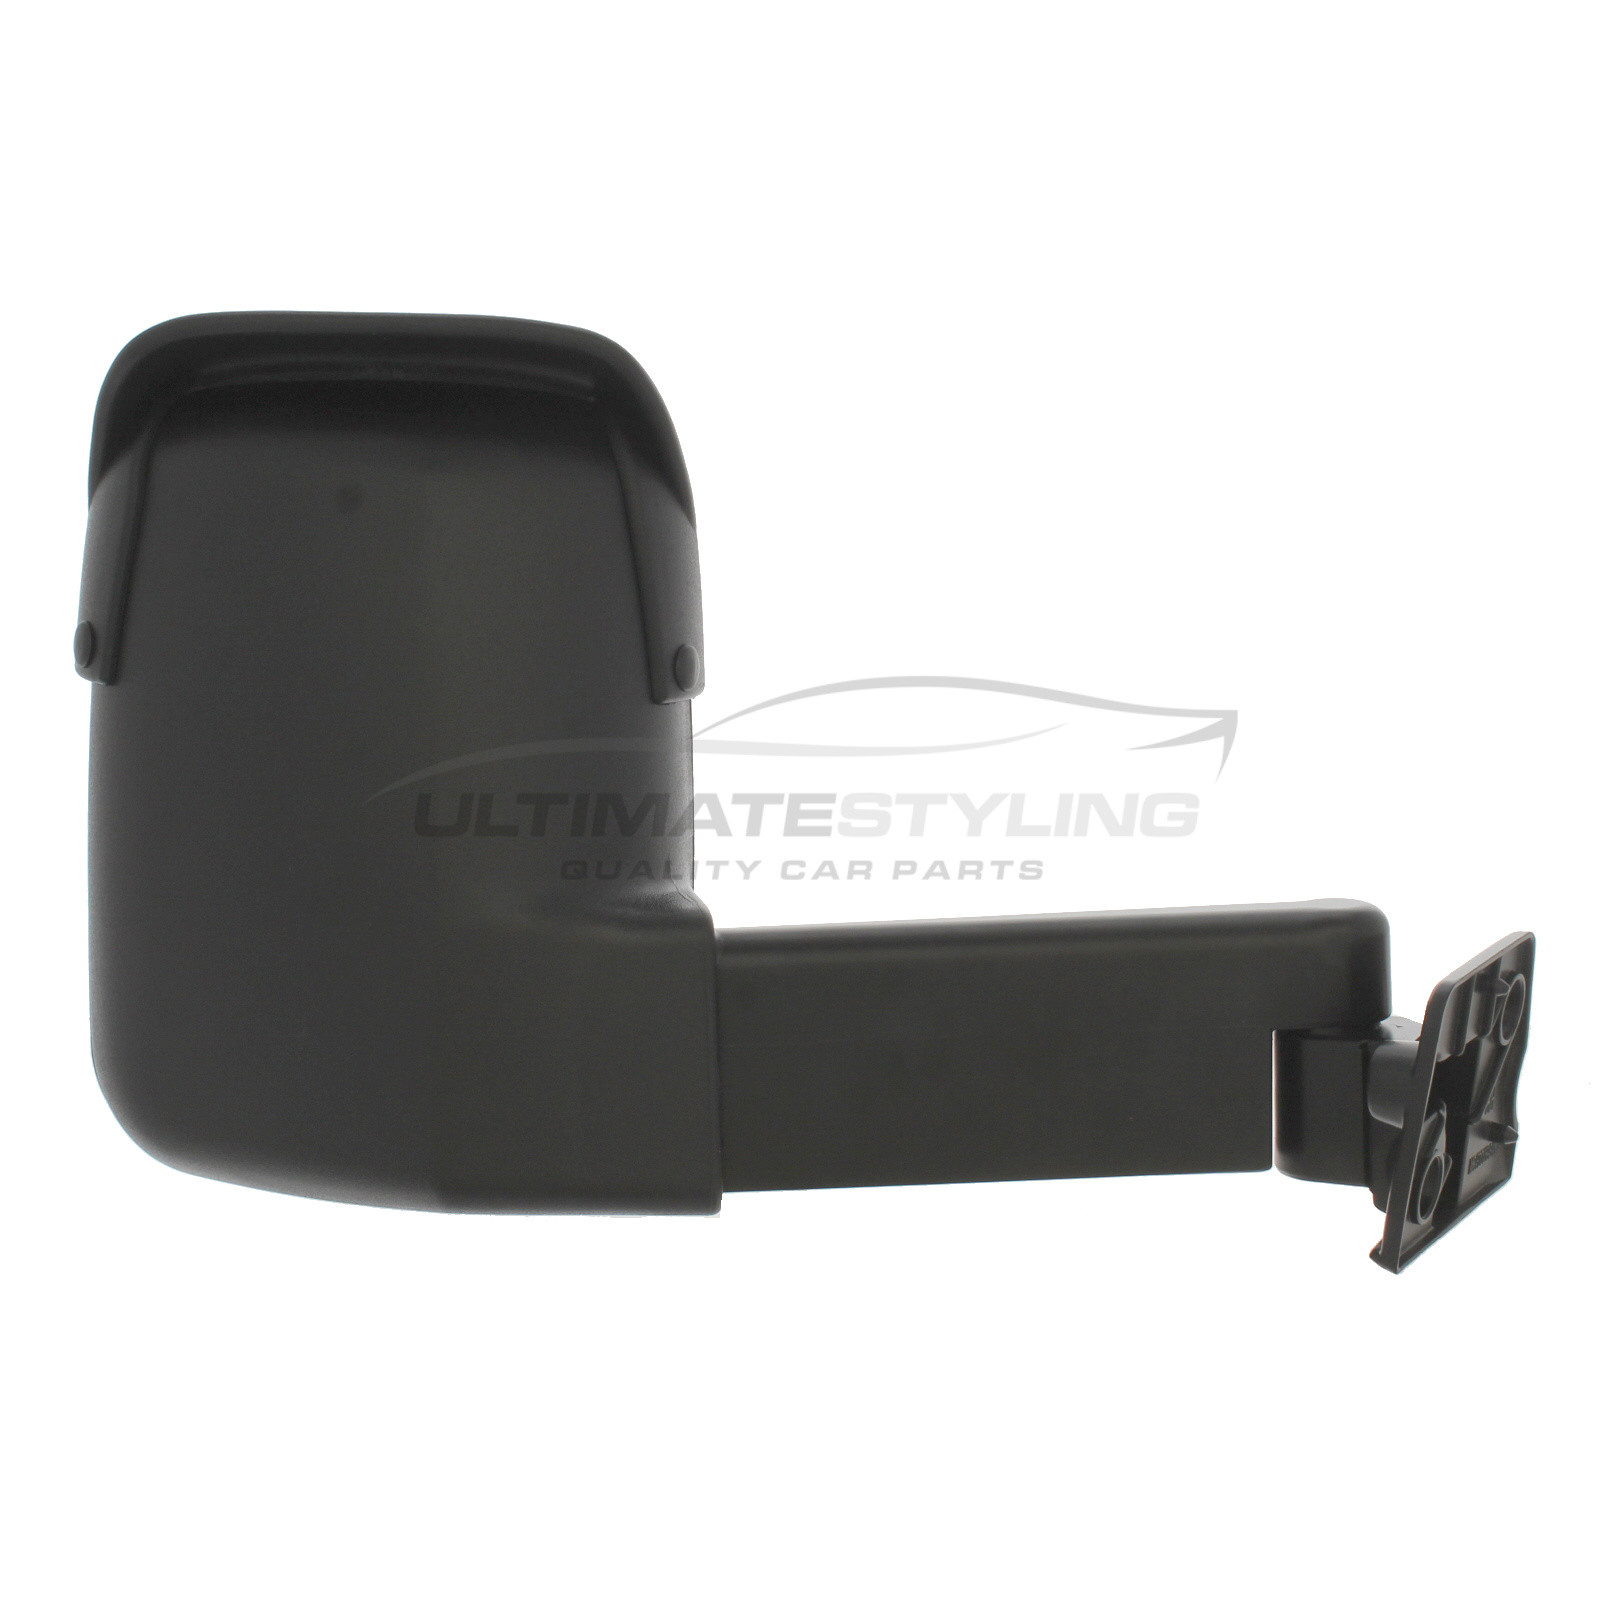 Ford Transit Mk3 & 4 1986-1994 Replacement Long Arm Wing Mirror RH